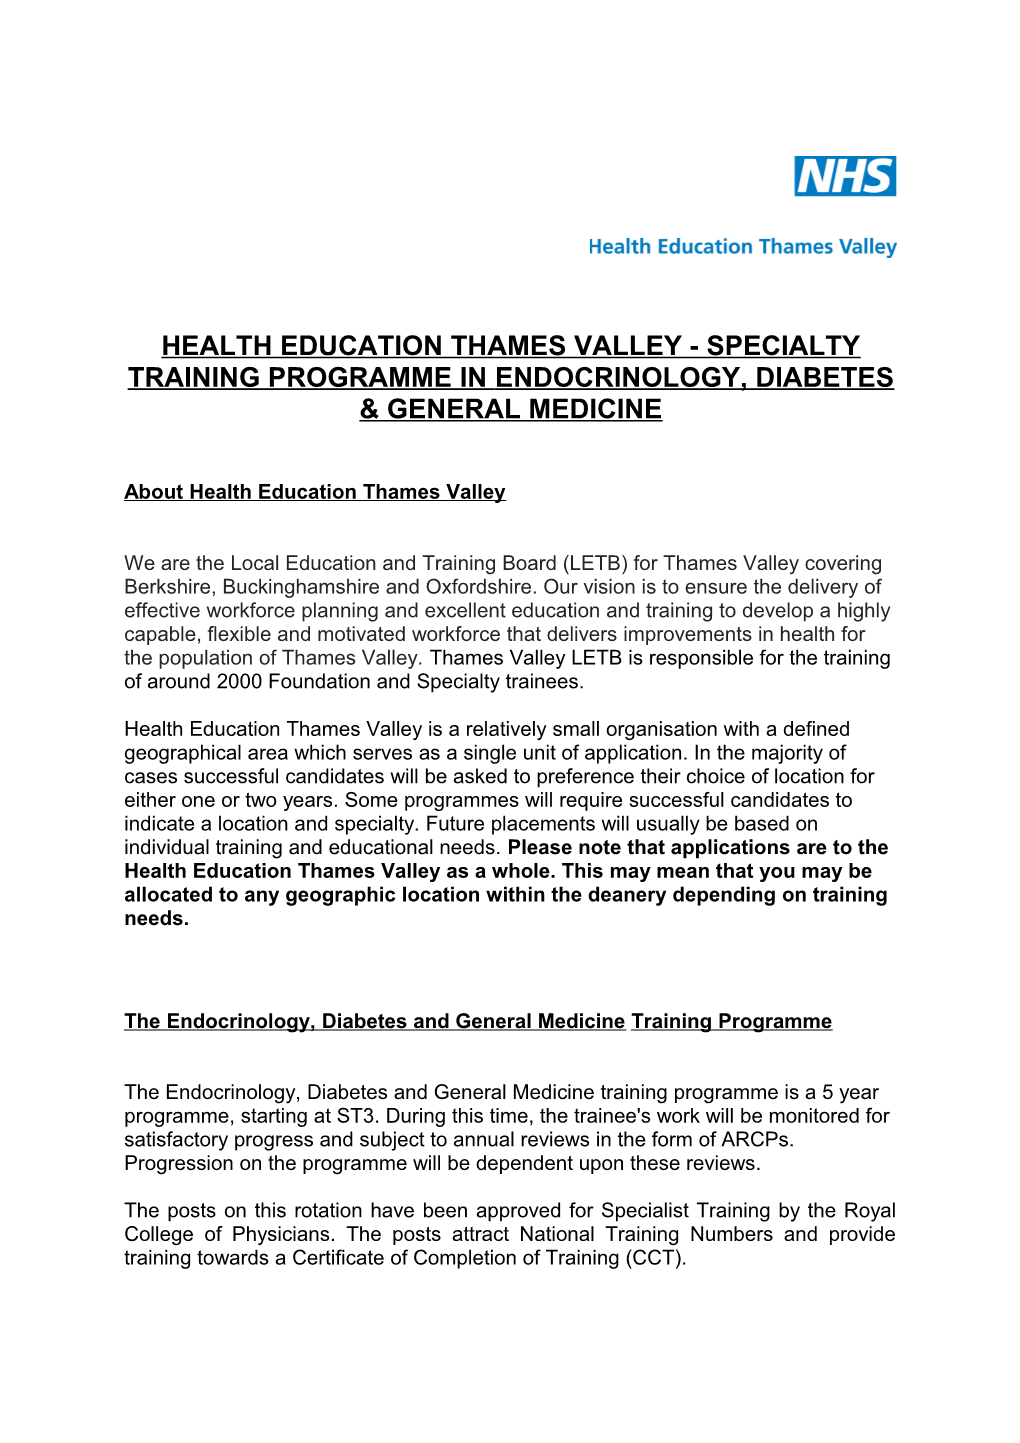 Health Education Thames Valley - Specialty Training Programme in Endocrinology, Diabetes s1